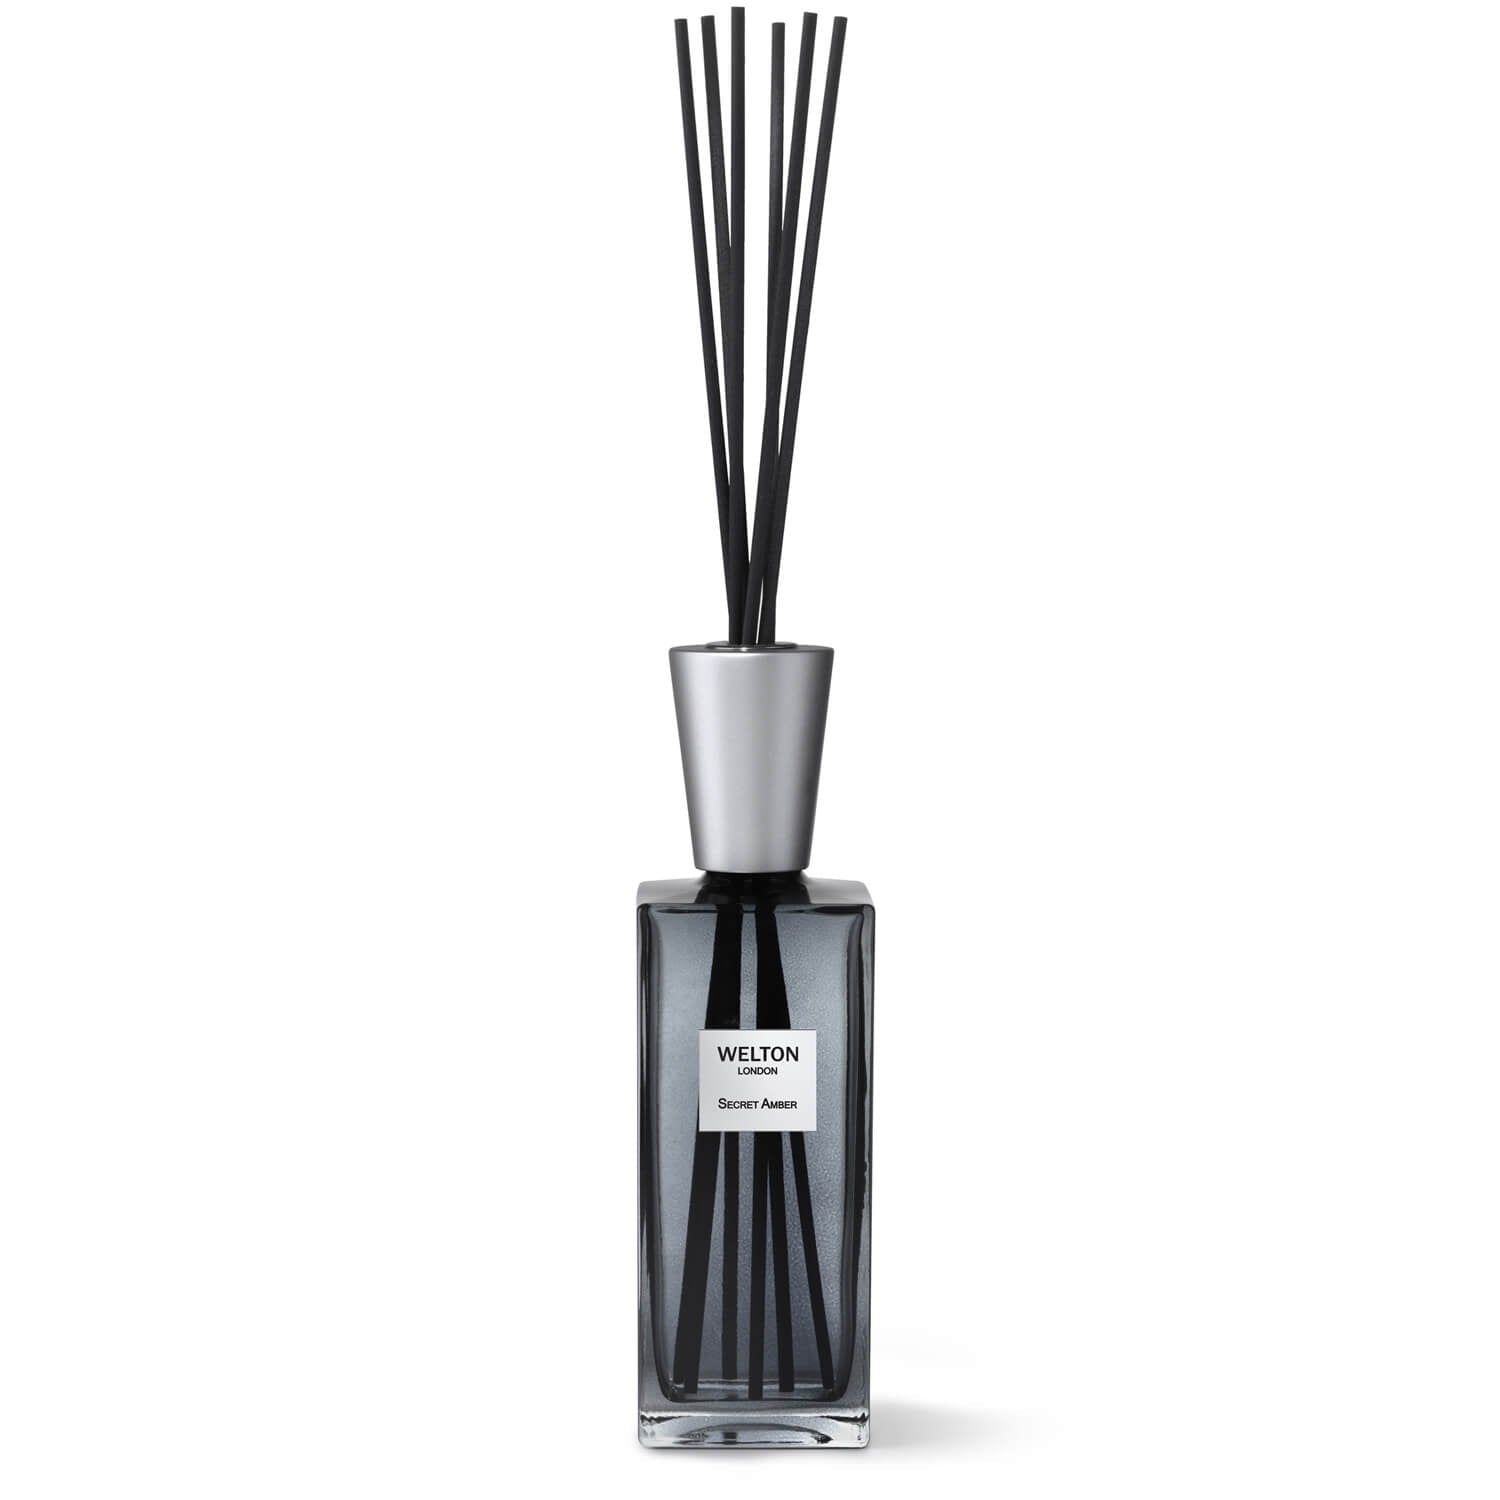 welton london diffuser secret amber xl
floral - amber - musky diffusers 